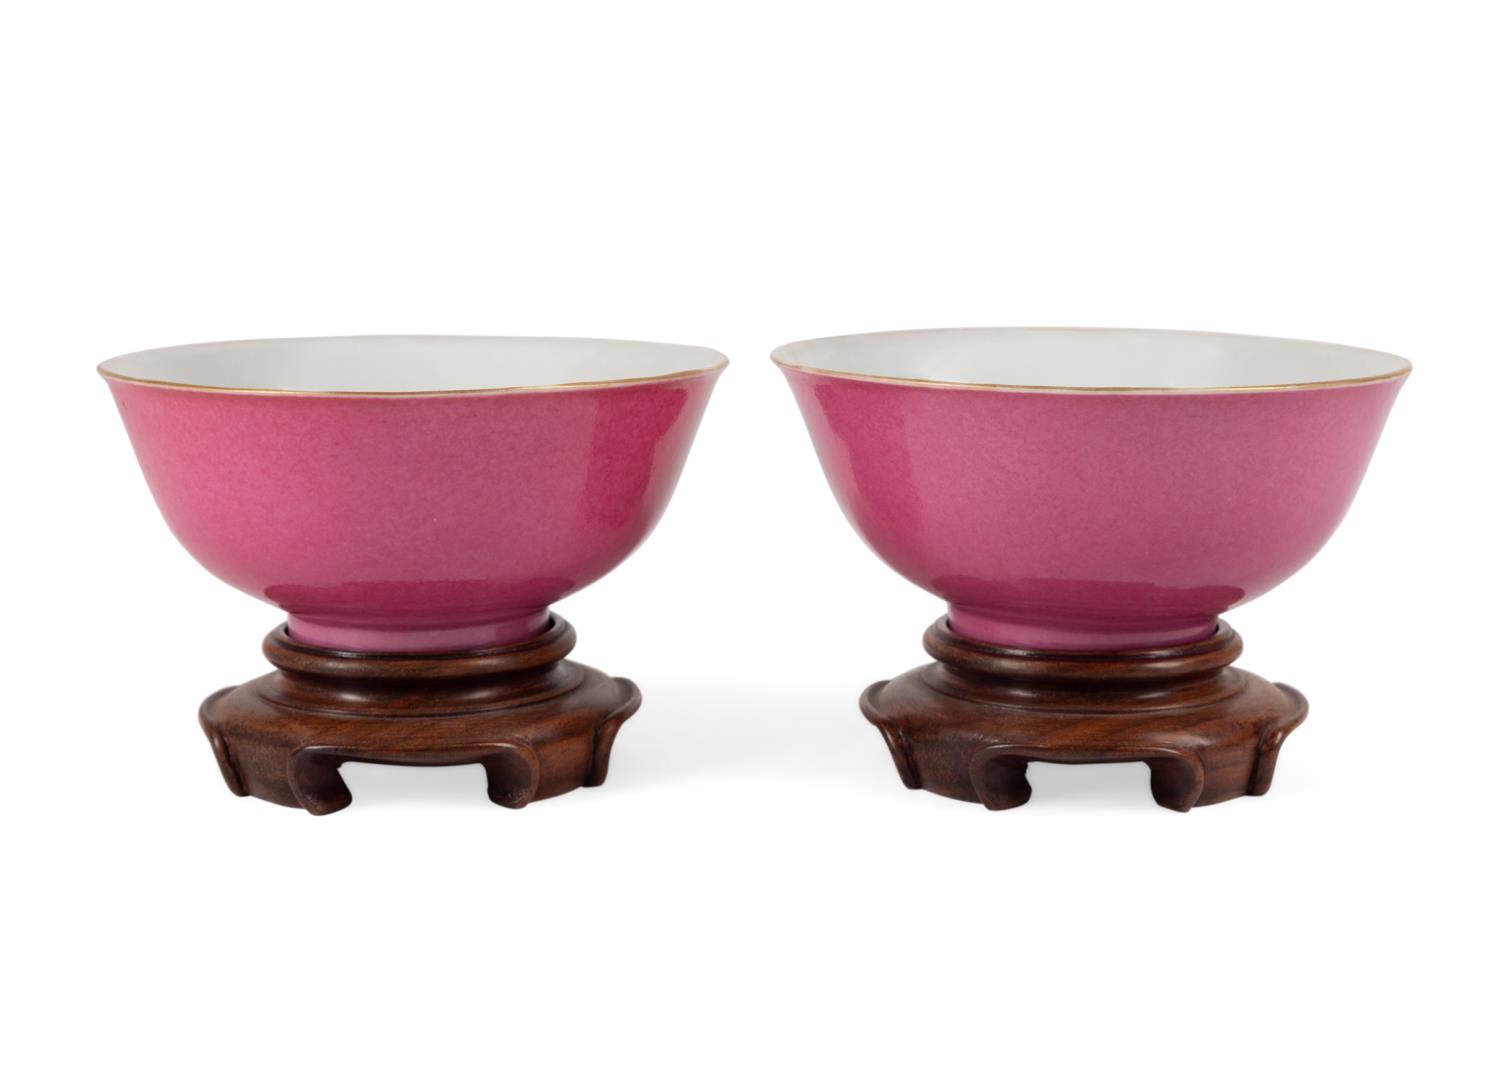 TWO CHINESE PINK ENAMELED BOWLS 3cd42c